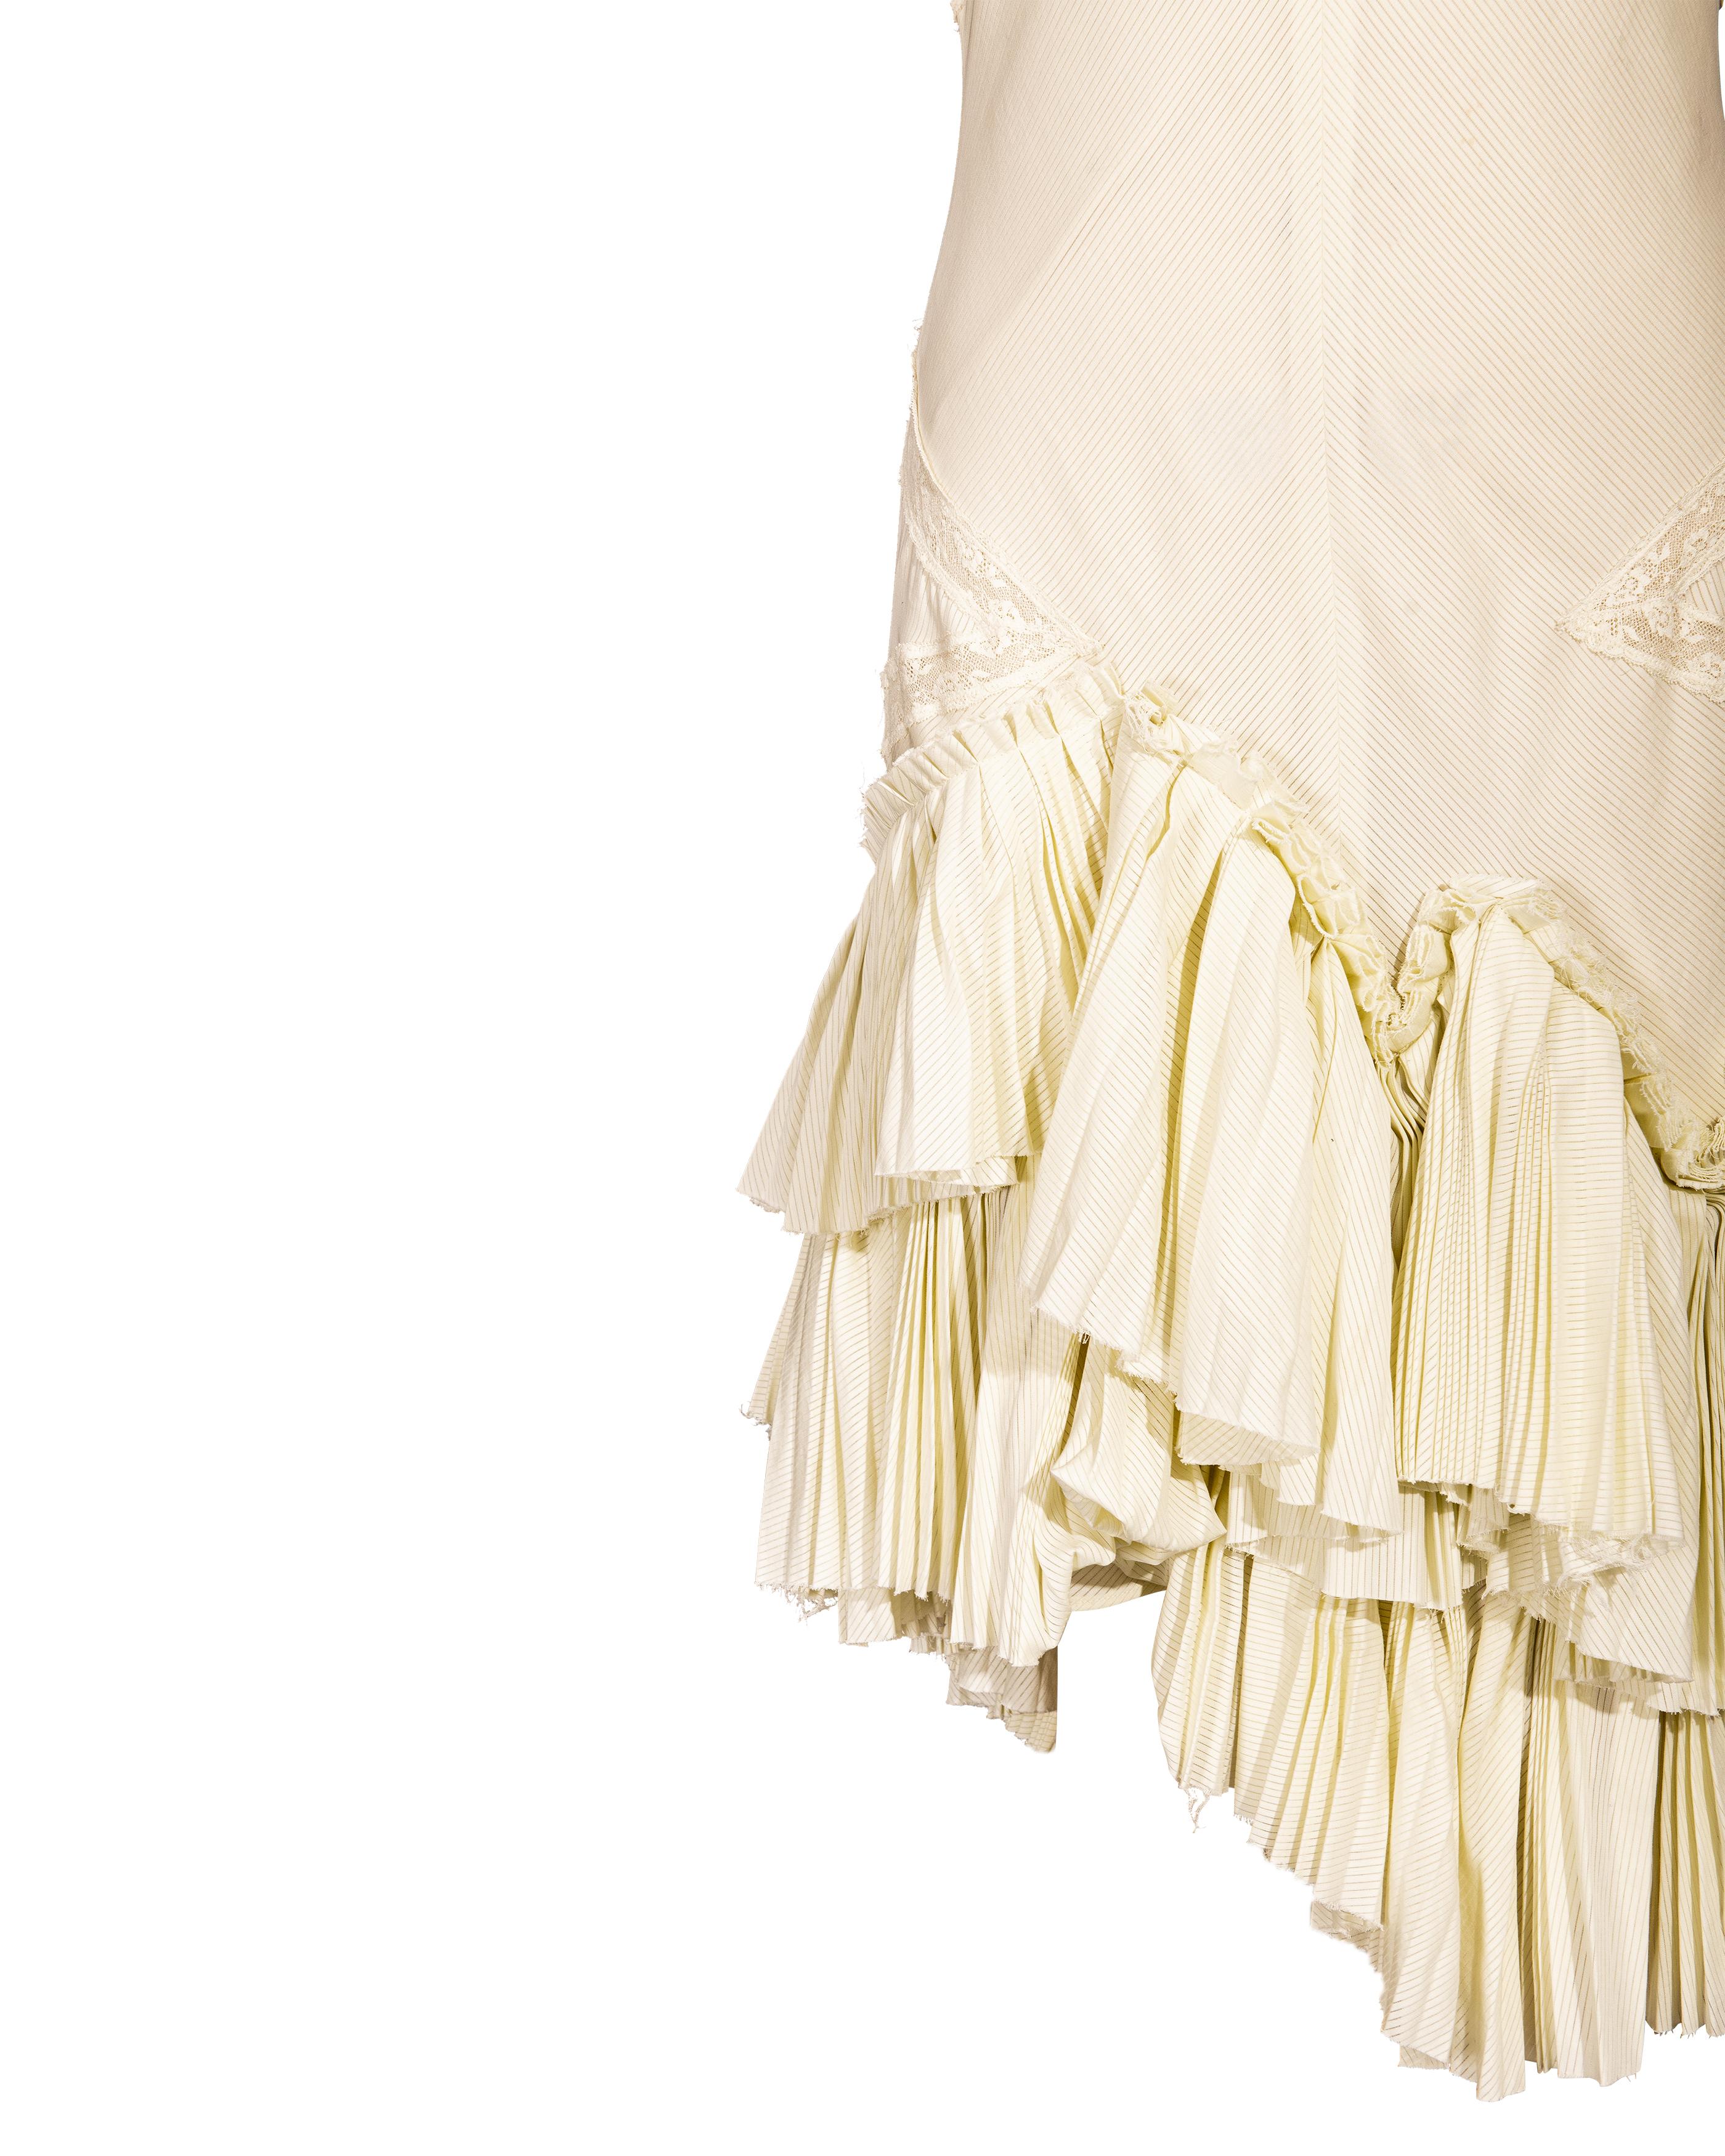 S/S 2005 Alexander McQueen (Lifetime) Pale Yellow Pleated and Lace Cotton Dress 3